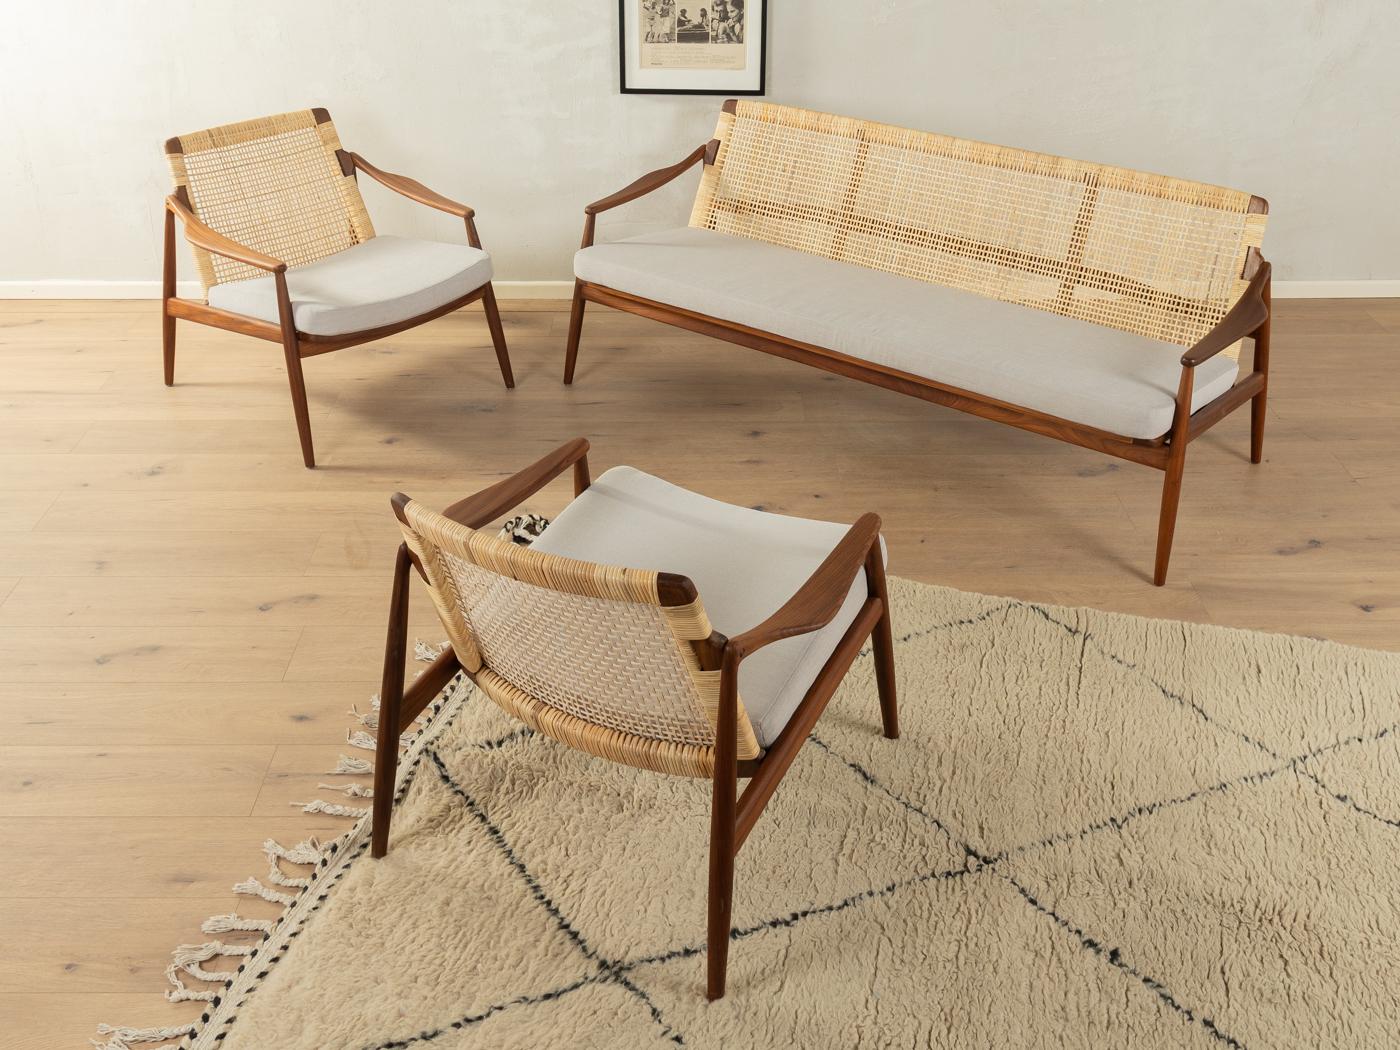 Exclusive furniture suite with one sofa and two armchairs of the Type 400 from the 1950s by Hartmut Lohmeyer for Wilkhahn. High-quality teak frame with new contemporary wicker work. The furniture suite has been reupholstered and covered with a